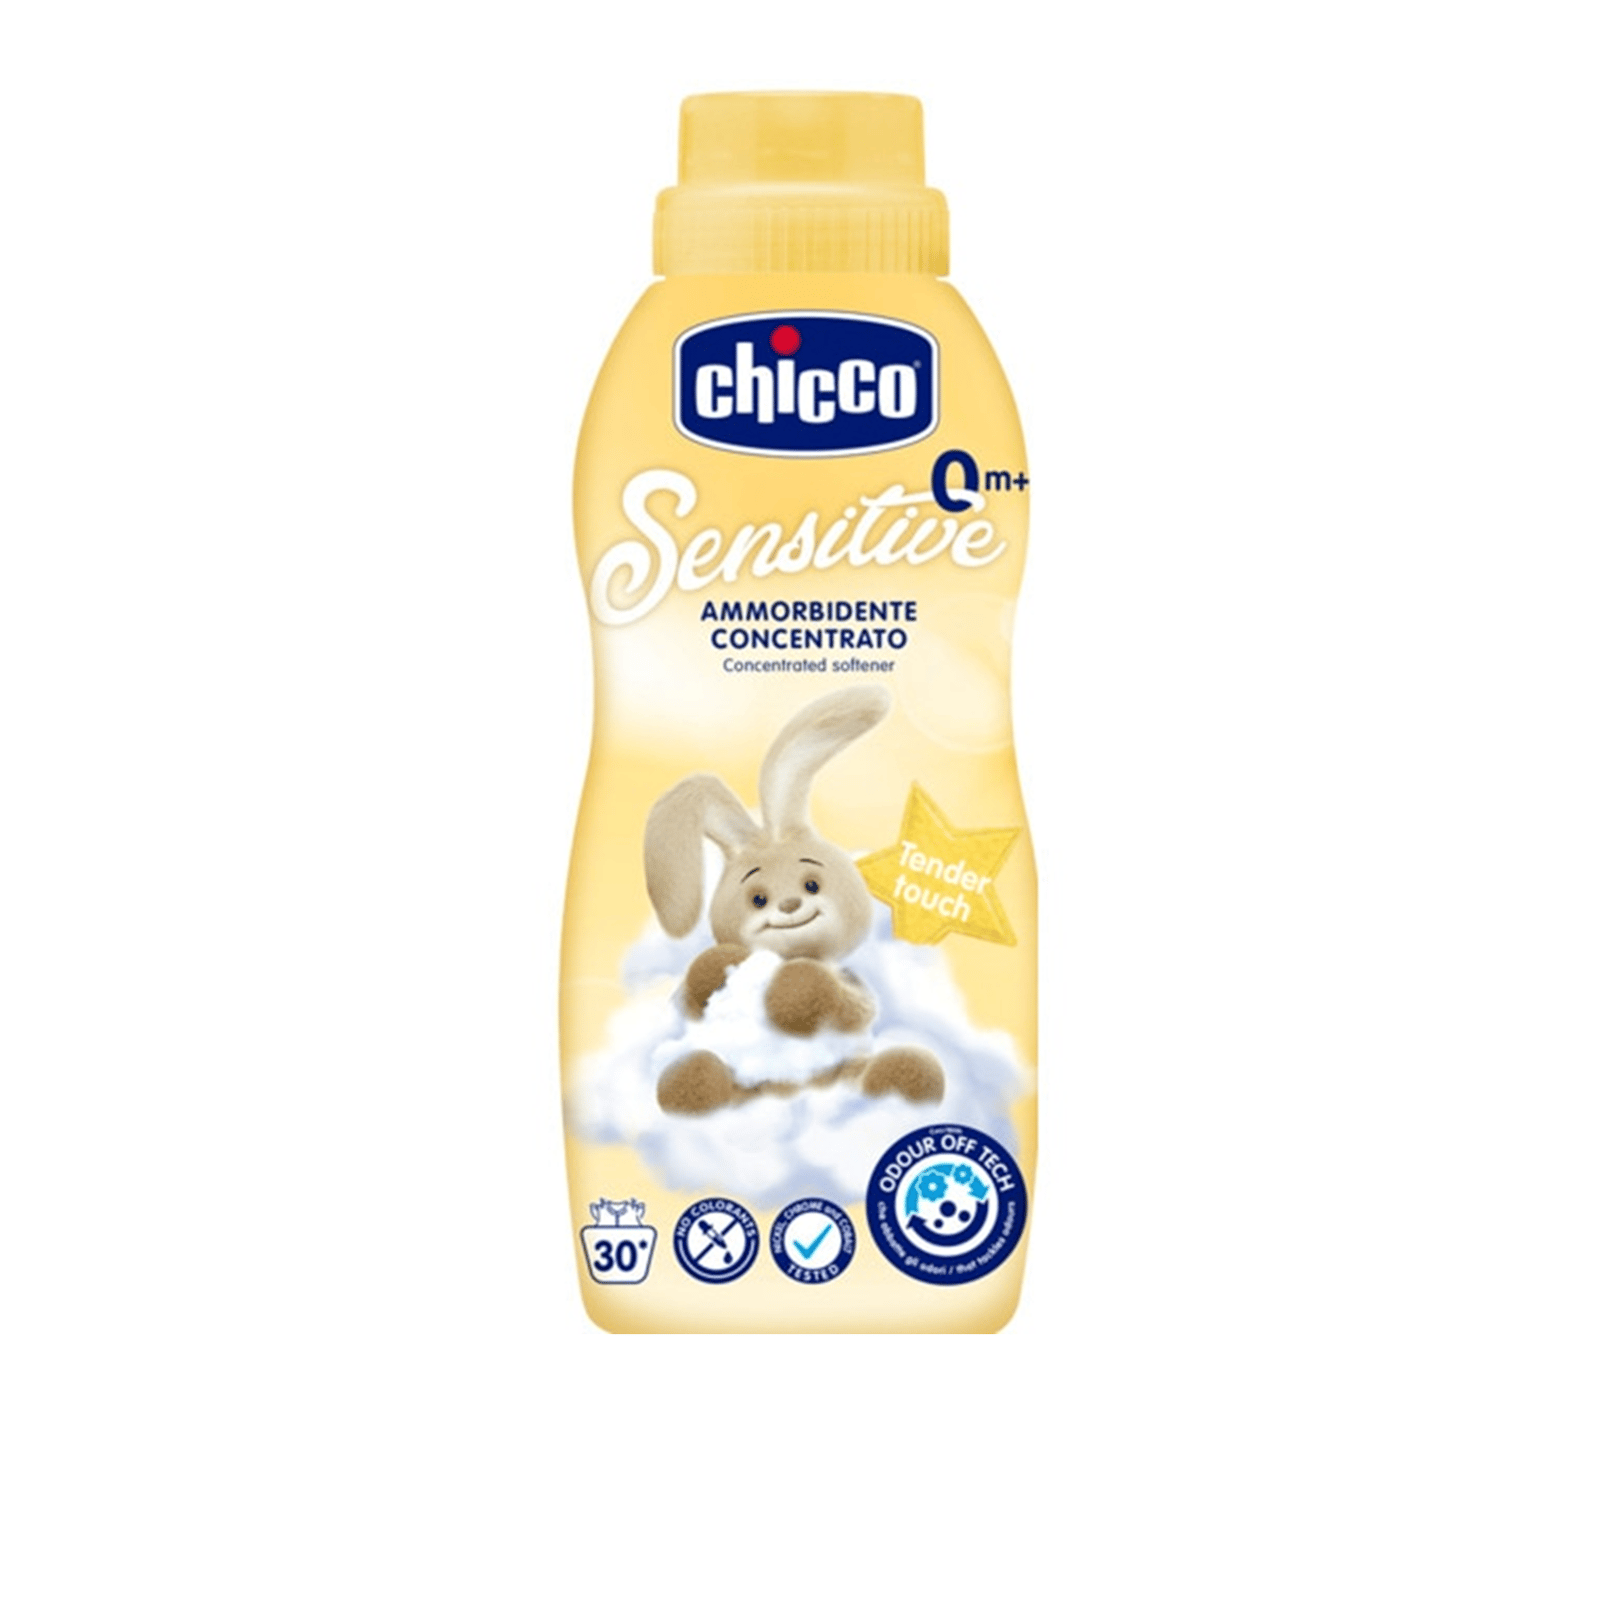 Chicco Sensitive Concentrated Softener Tender Touch 0m+ 750ml (25.36 fl oz)